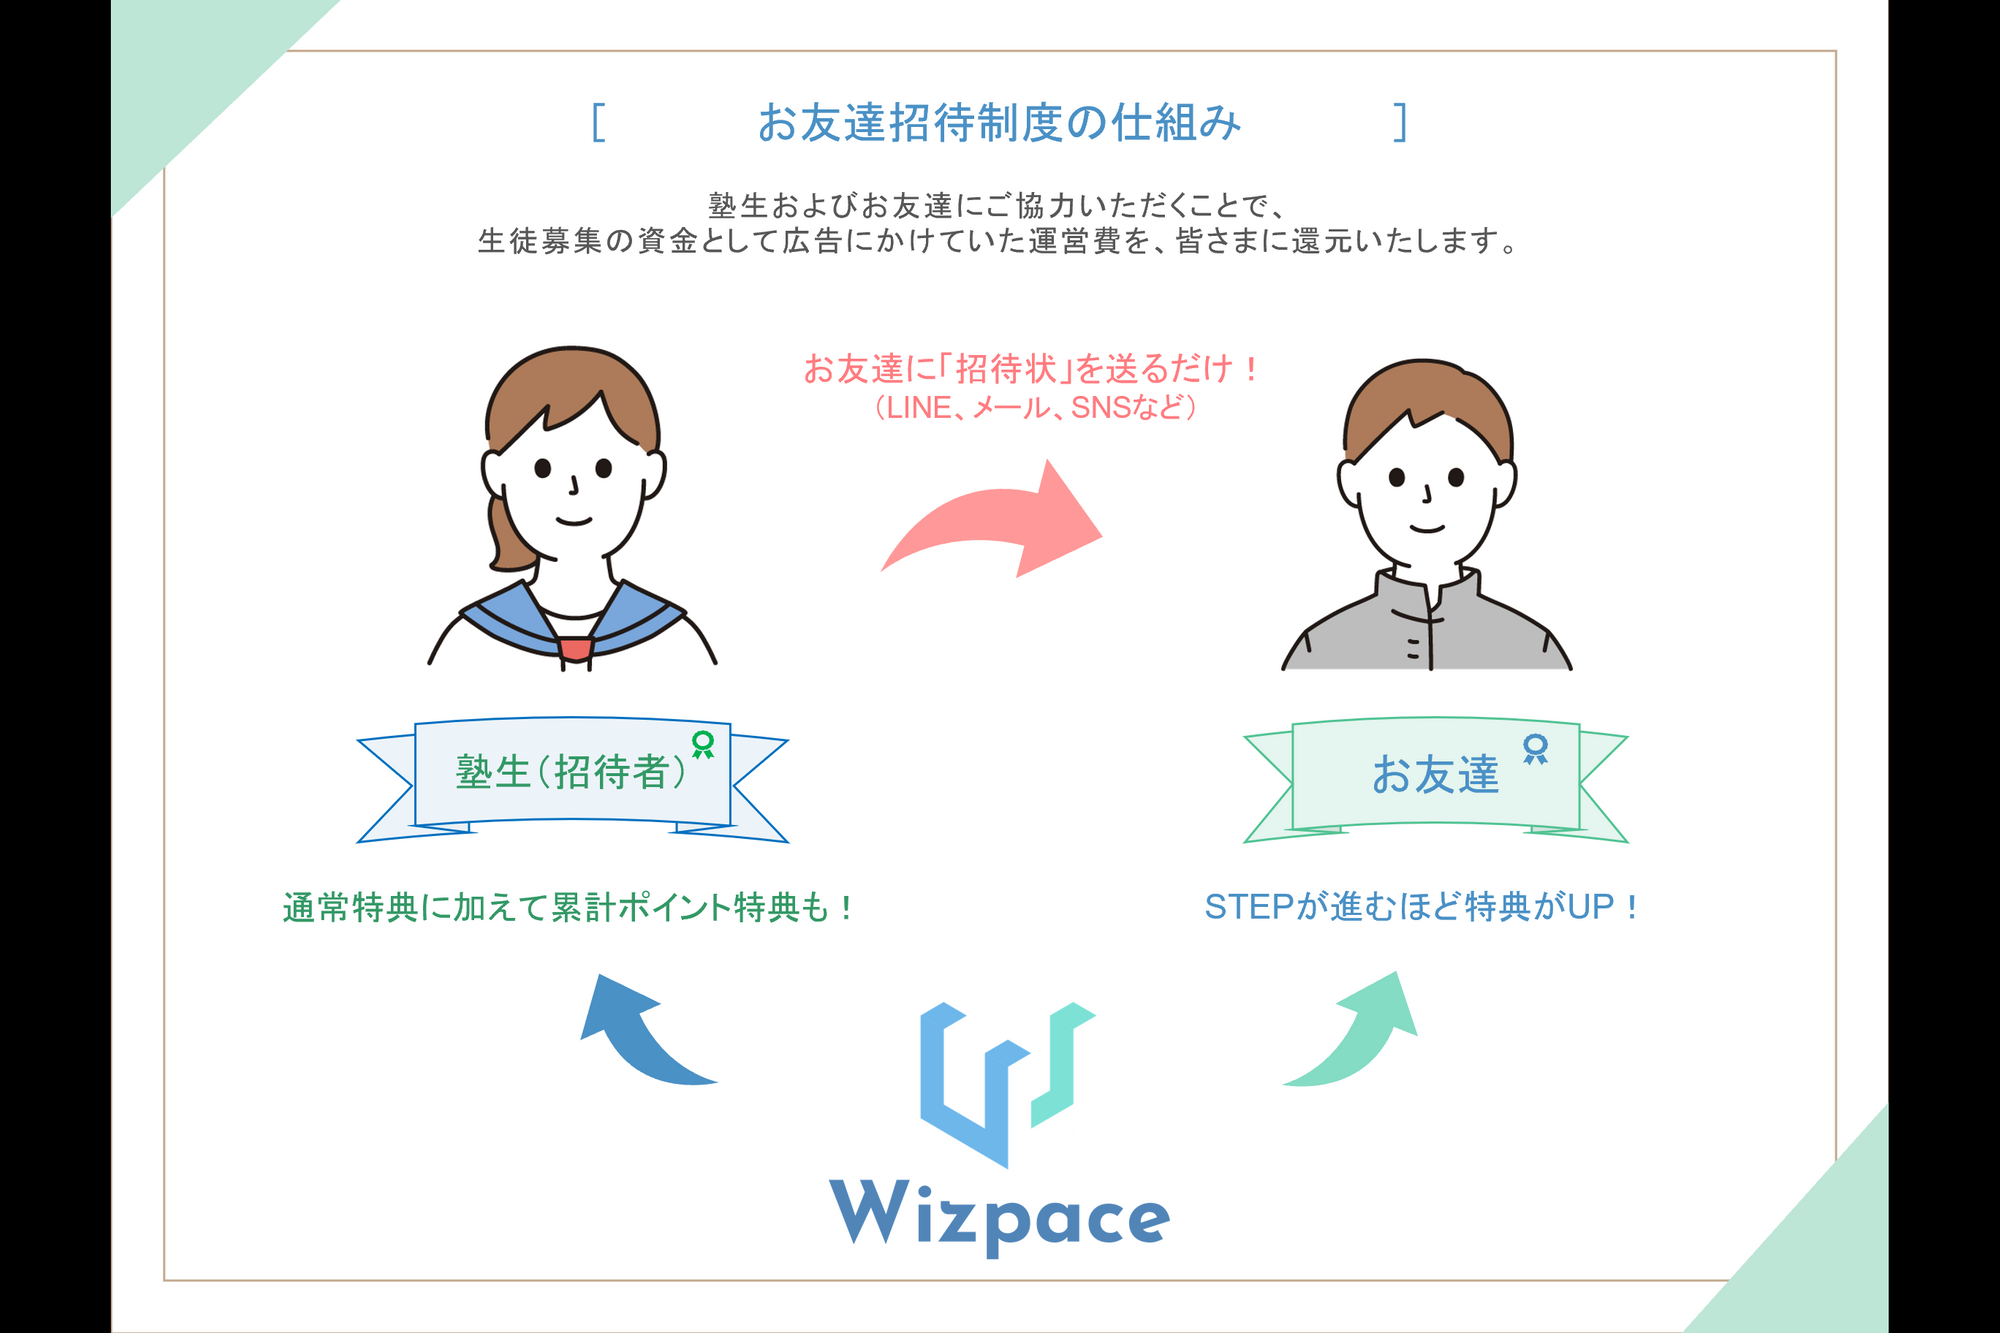 Wizpace独自のお友達招待制度2